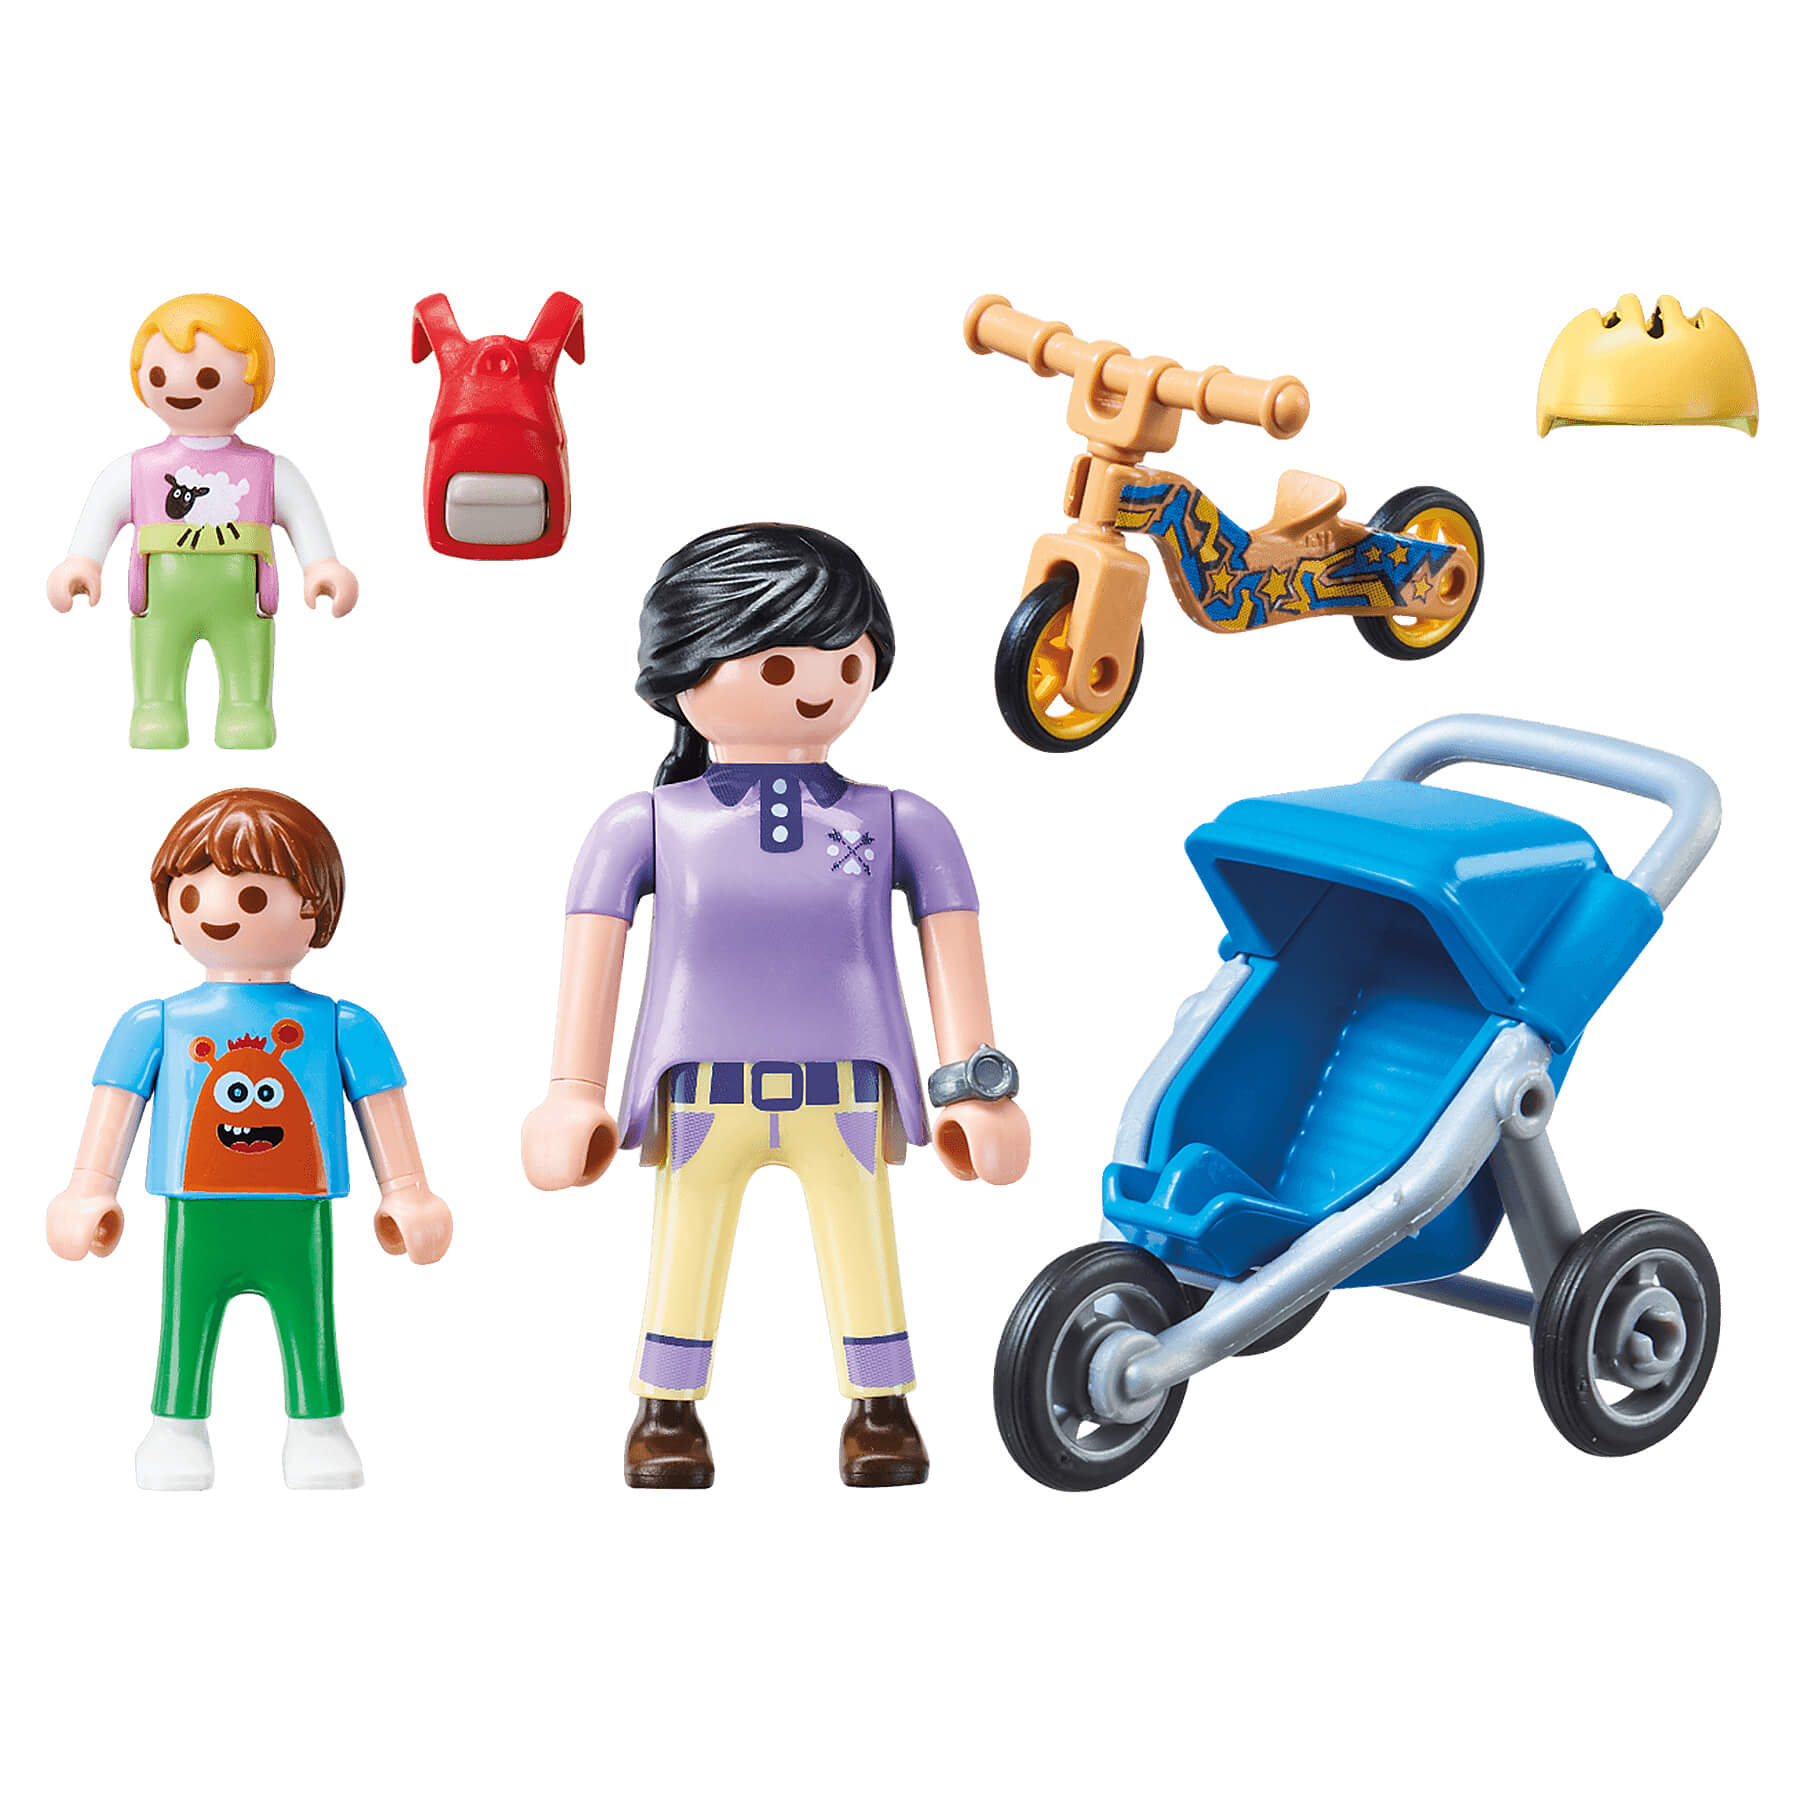 PLAYMOBIL Daycare Mother with Children (70284)